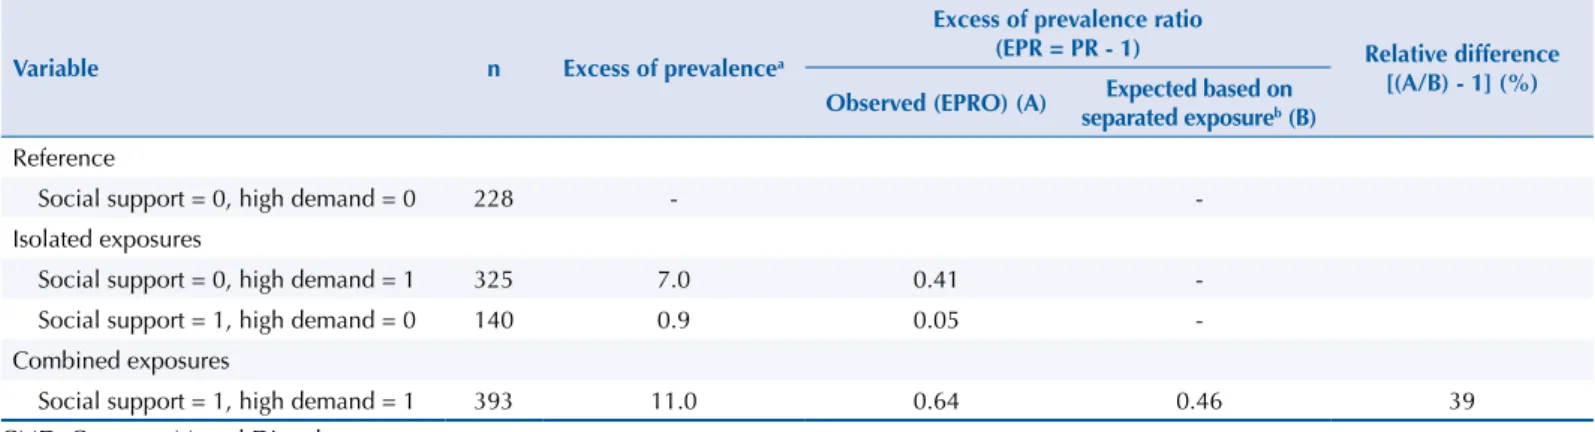 Table 3. Excess of prevalence and excess of prevalence ratios for isolated and combined effects of high demand and low social support in  the workplace on the occurrence of CMD, in health workers